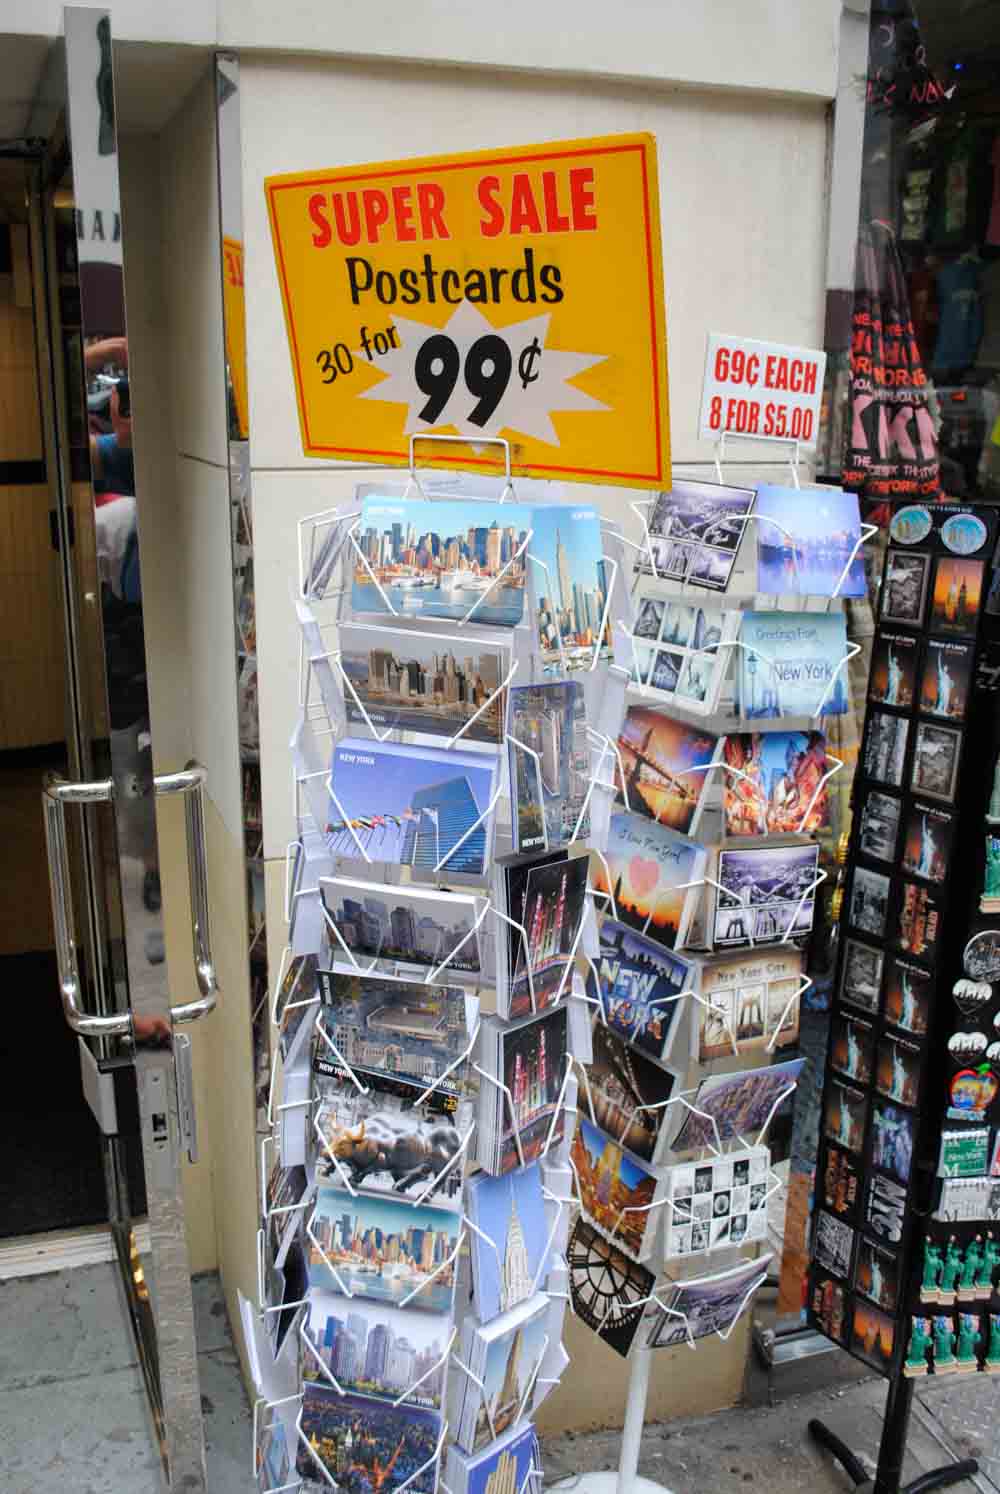 30 postcards for 99 cents in New York